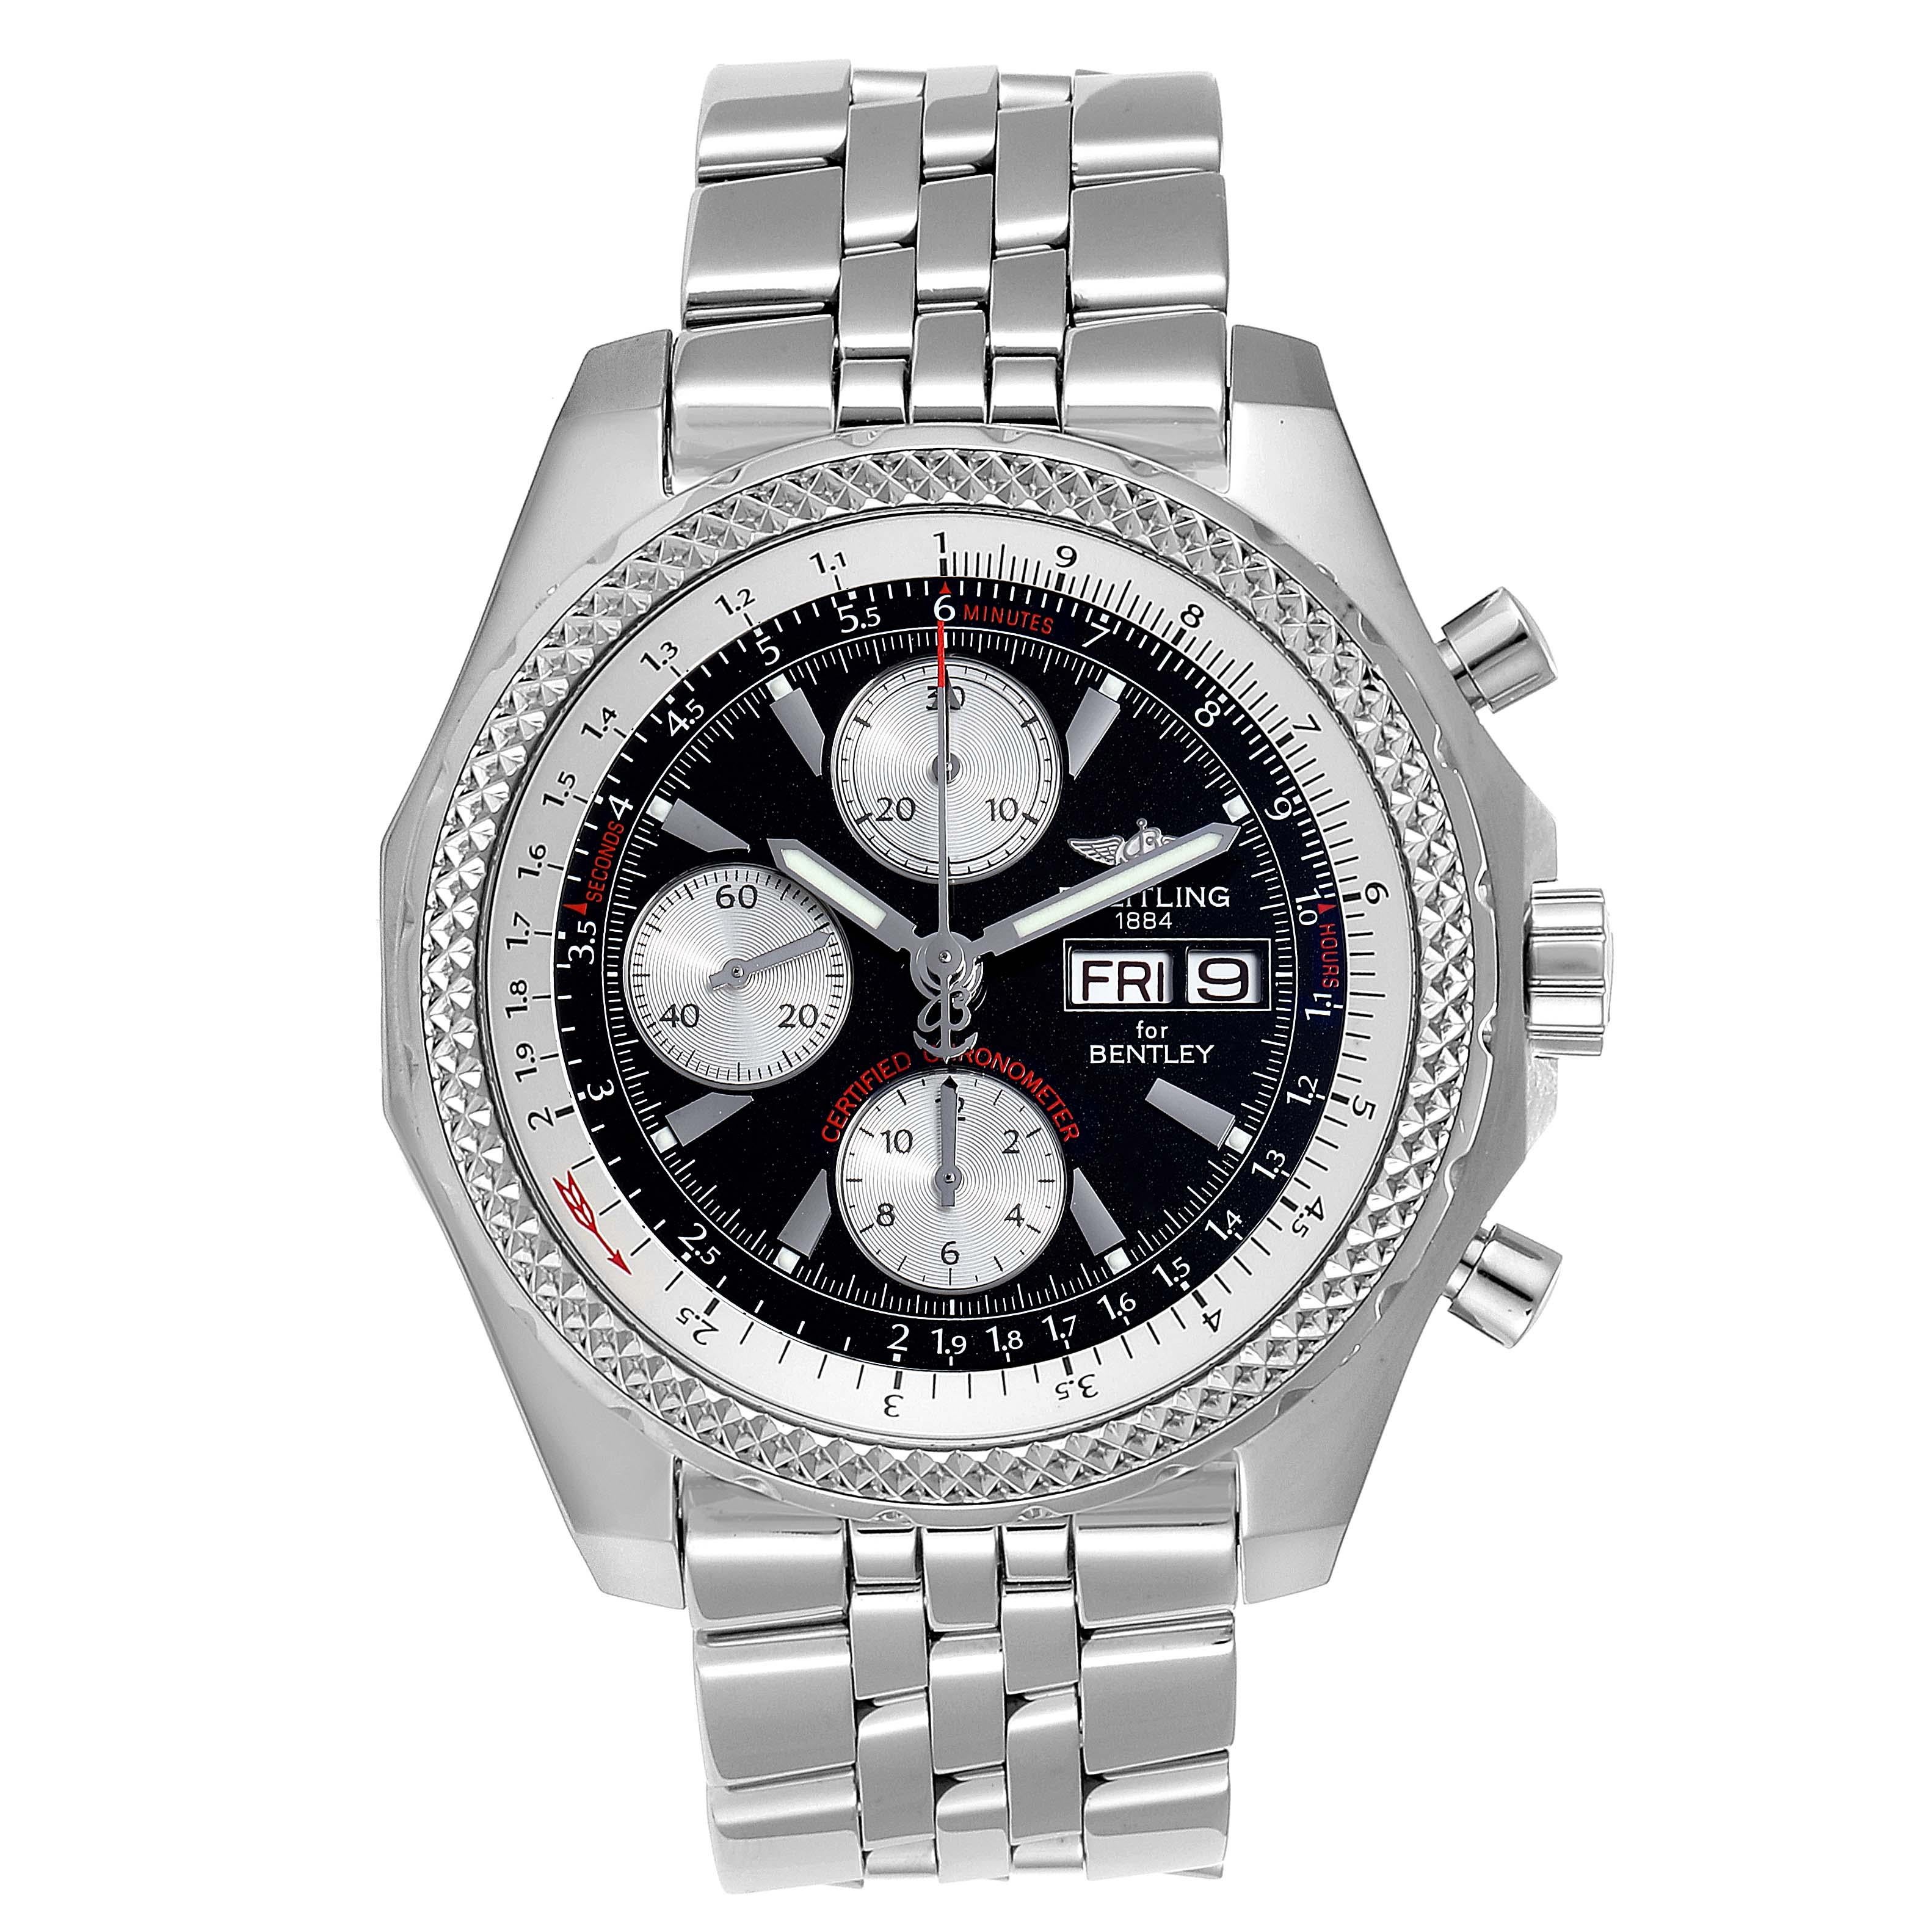 Breitling Bentley Motors GT Black Dial Steel Mens Watch A13362. Self-winding automatic officially certified chronometer movement. Chronograph function. Stainless steel case 44.8 mm in diameter. Stainless steel screwed-down crown and pushers. Screw